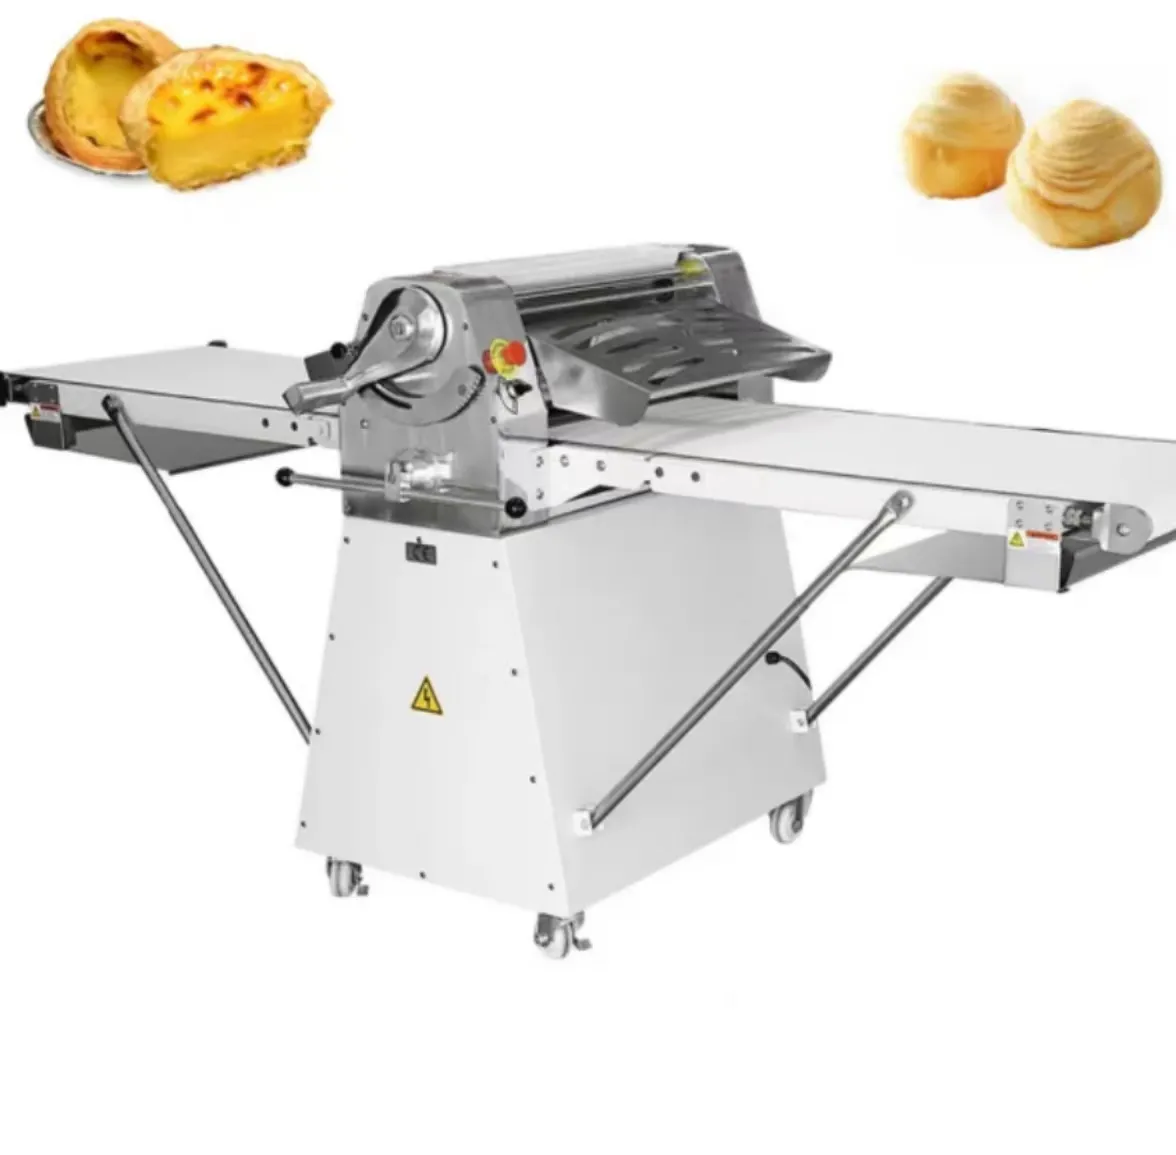 Folding Removable Bakery Dough Sheeter Machine|Puff Pastry Machine with low price